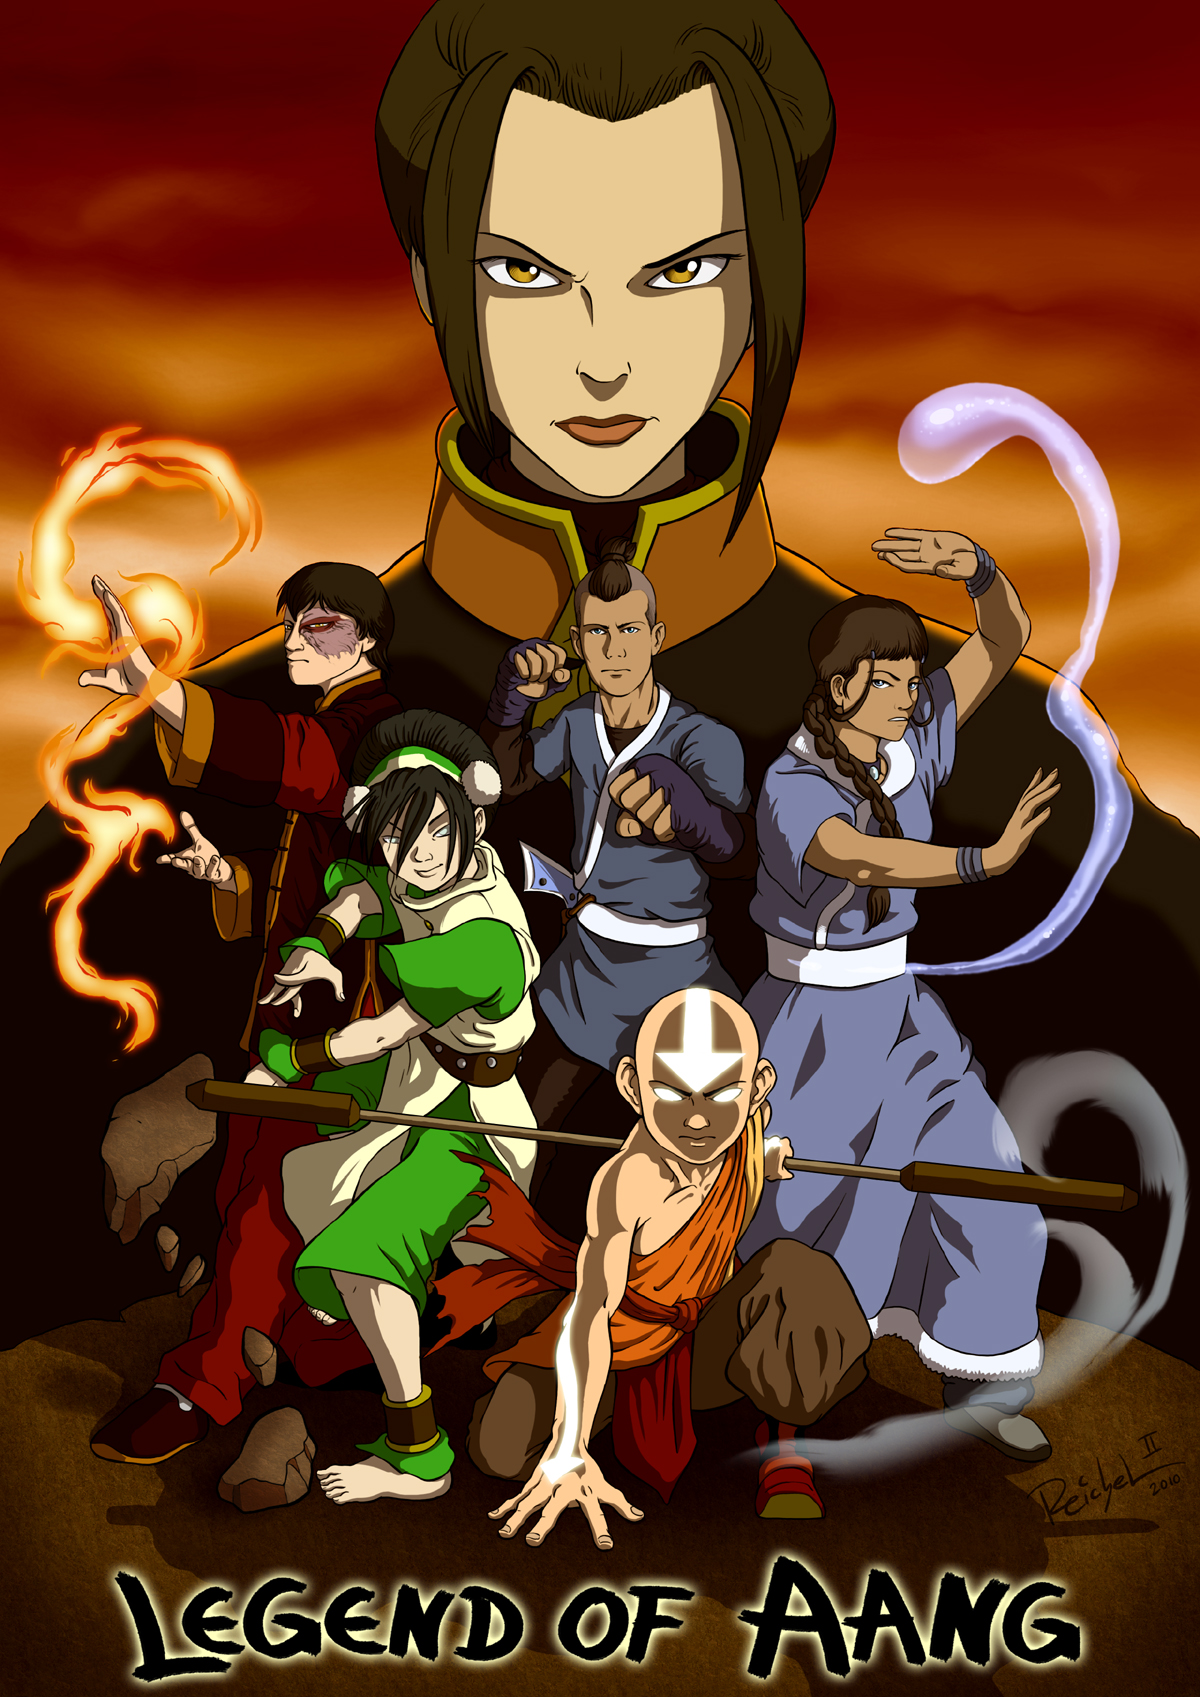 Avatar legend of aang english. Аватарлегенла об аанаге. Аватар легендатоб ангк.